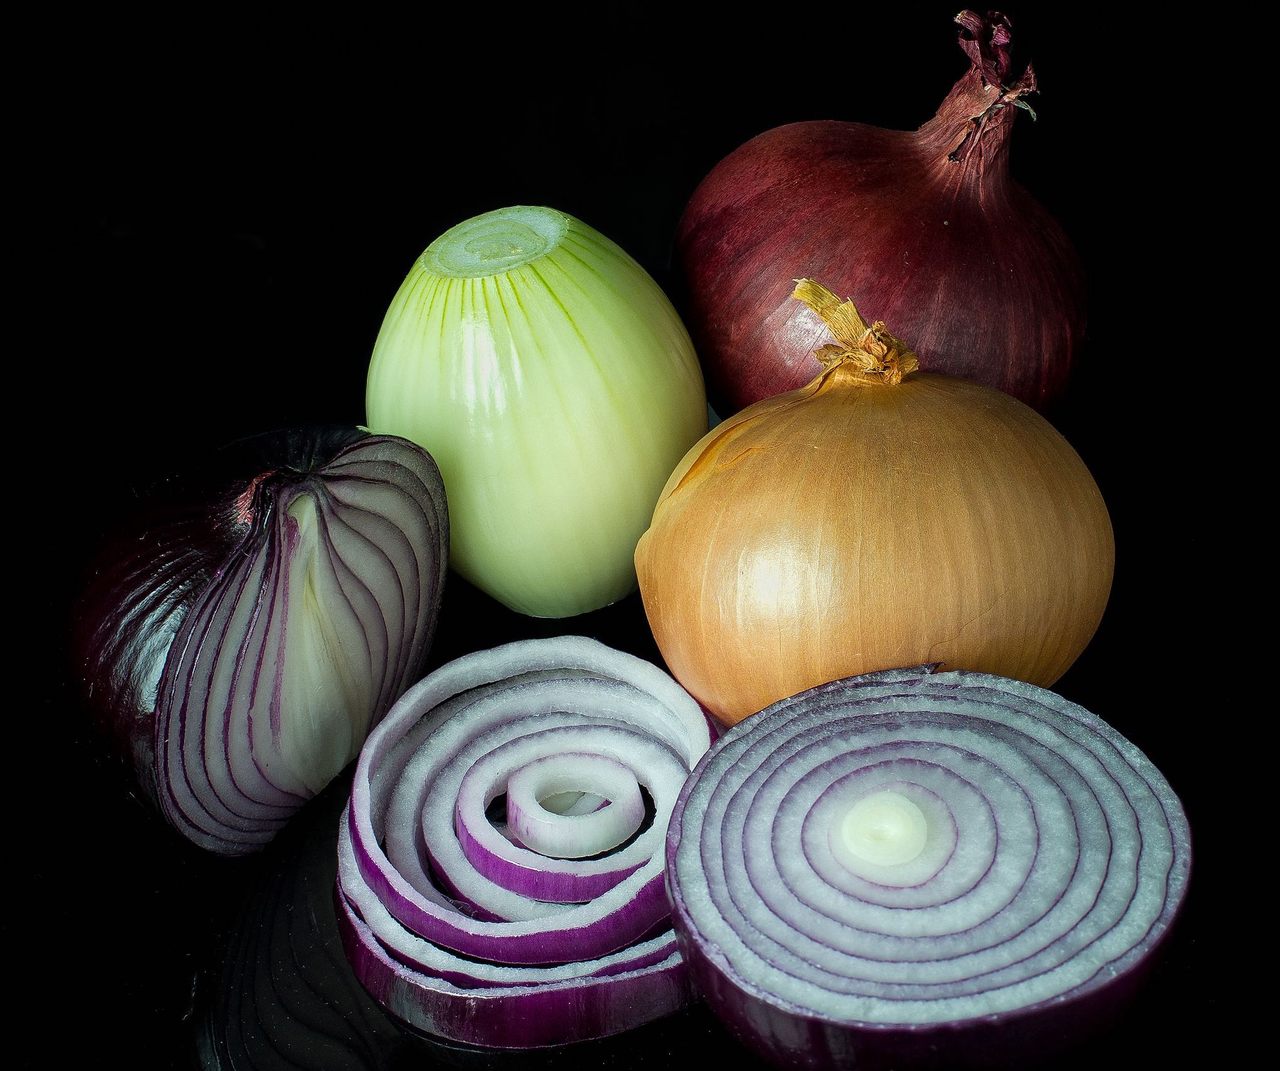 You can use any type of onion to make a calendar, but the Eszlingers prefer yellow.